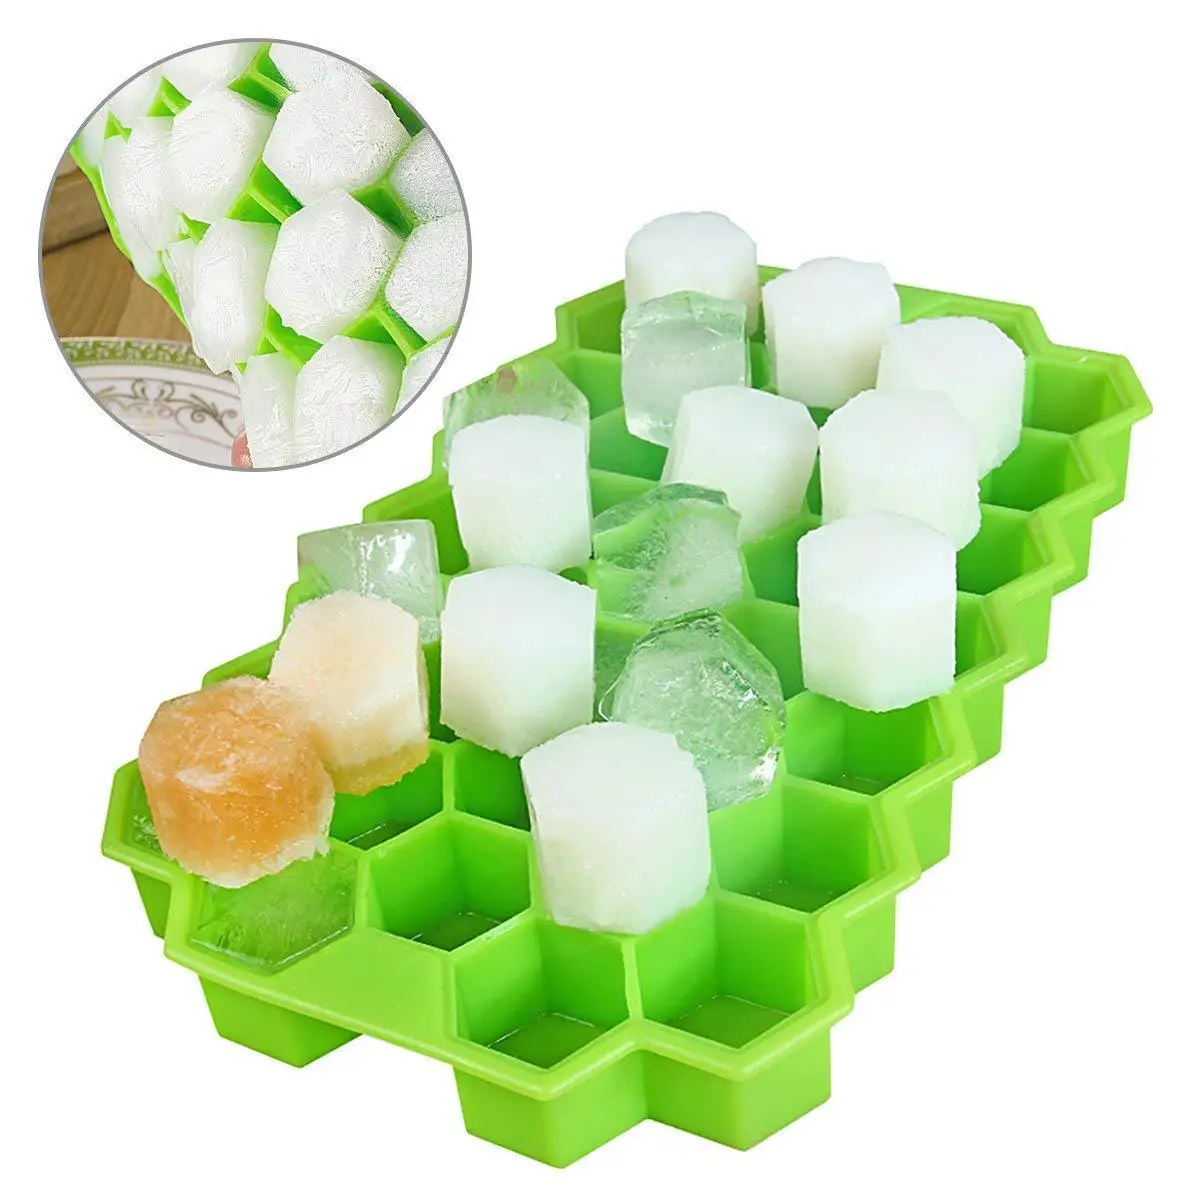 

Honeycomb Ice Cube Trays Reusable Silicone Ice cube Mold BPA Free Ice maker with Removable Lids